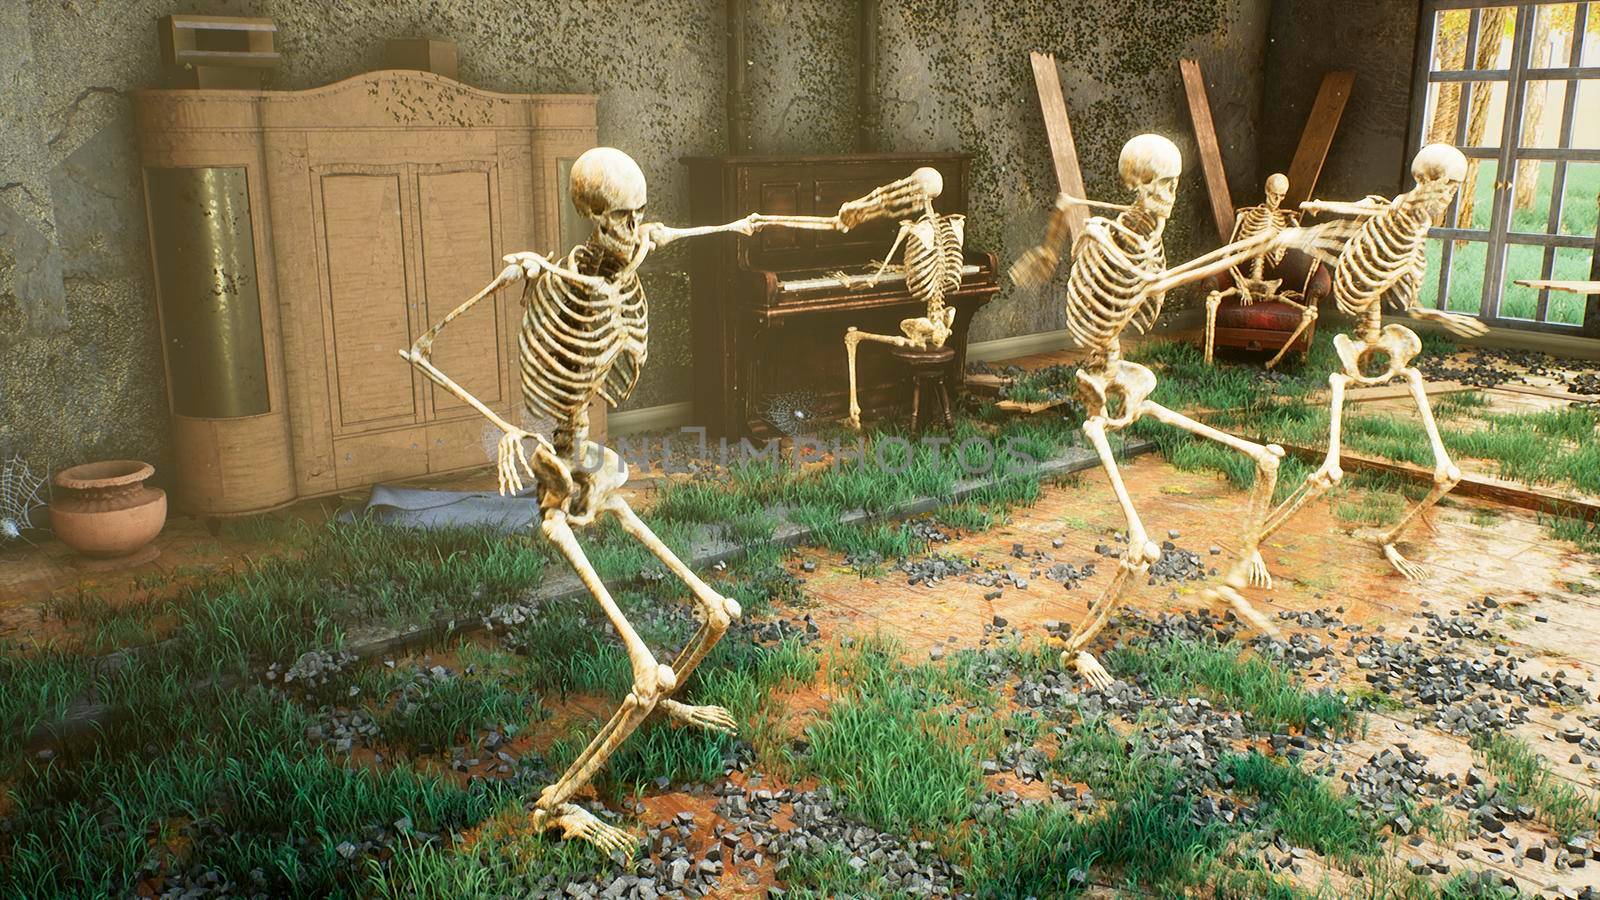 Skeletons dancing a fun dance in an old ruined house. The concept of a post-apocalyptic world or Halloween horror.